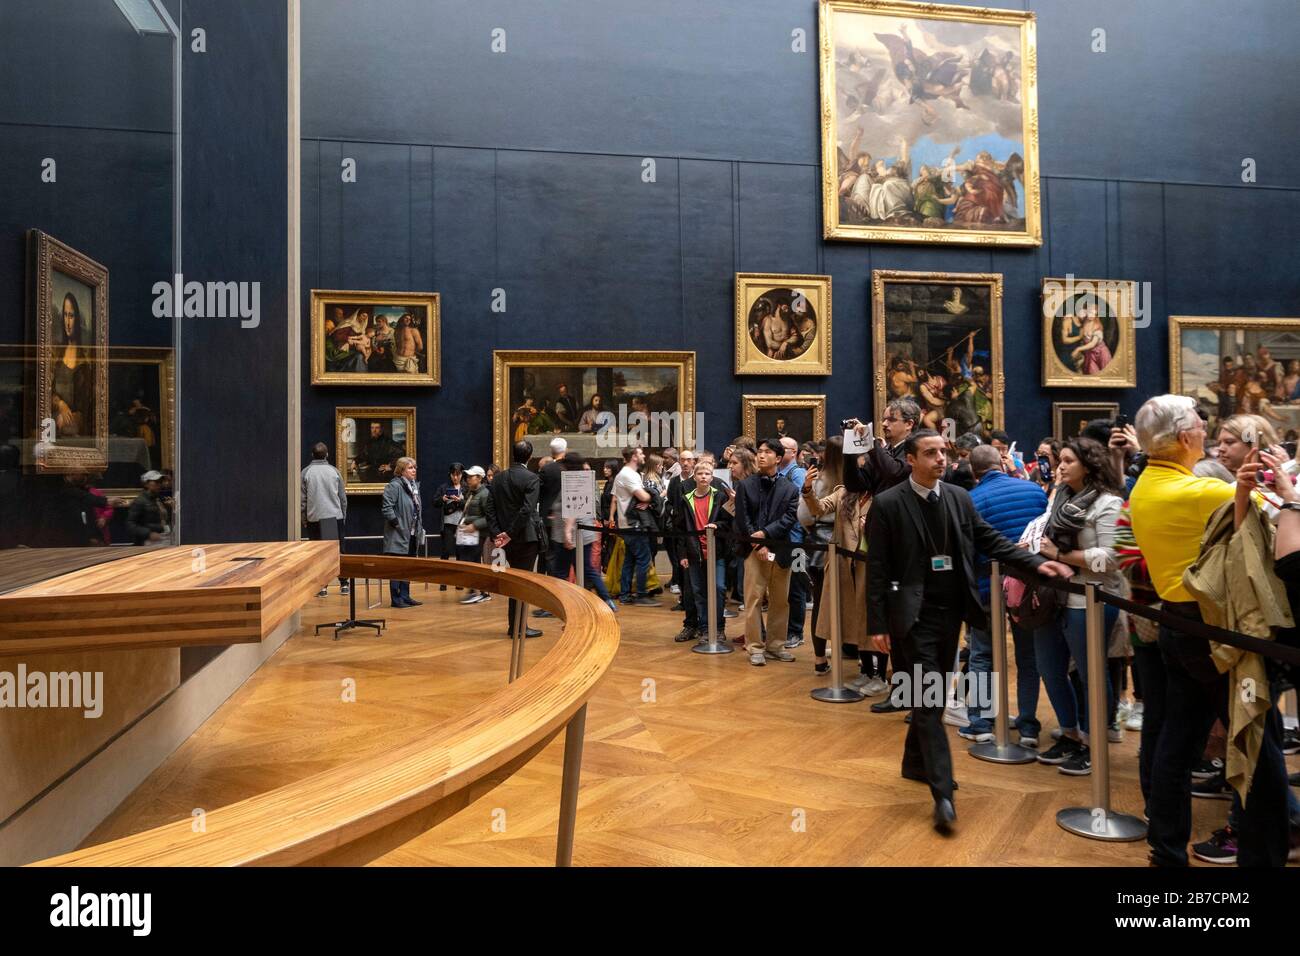 Tourists queuing to take pictures of the Mona Lisa painting by italian artist Leonardo da Vinci at the Louvre Museum in Paris, France, Europe Stock Photo